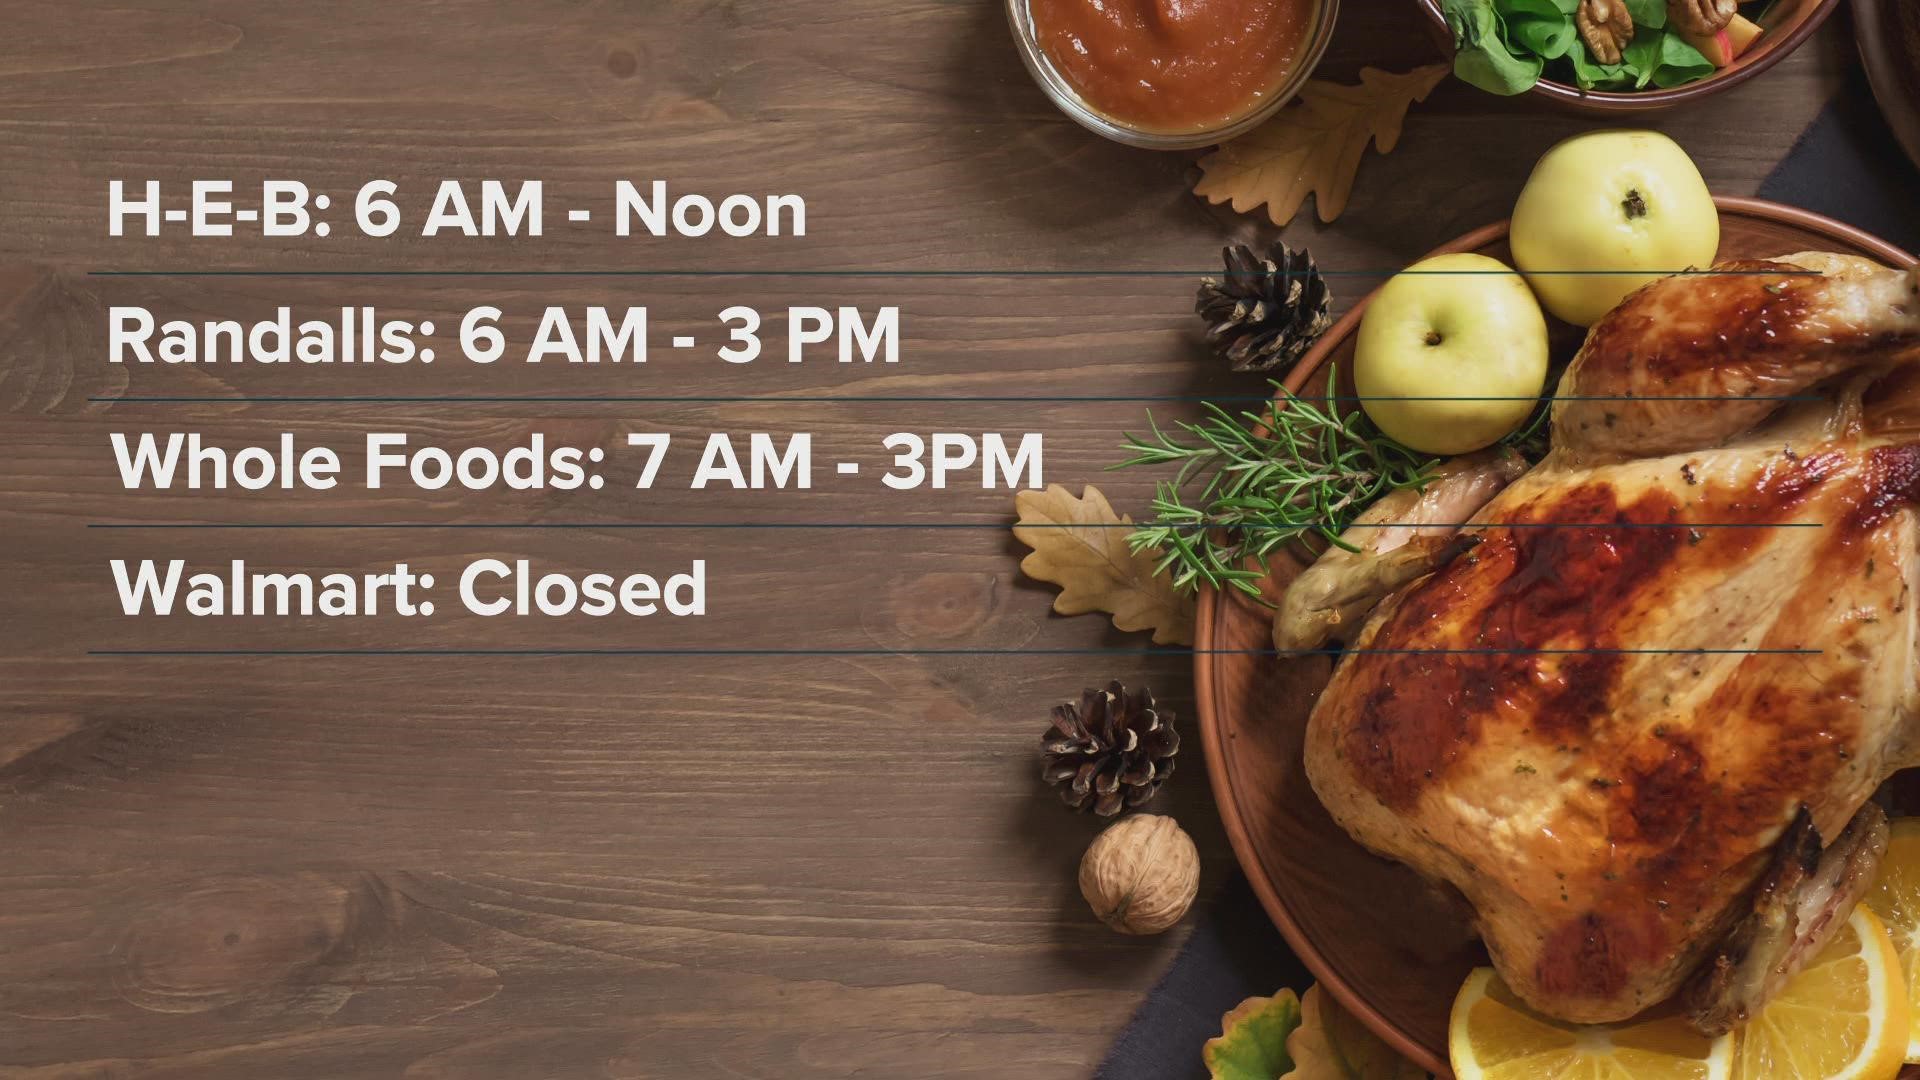 H-E-B stores will be open until noon.